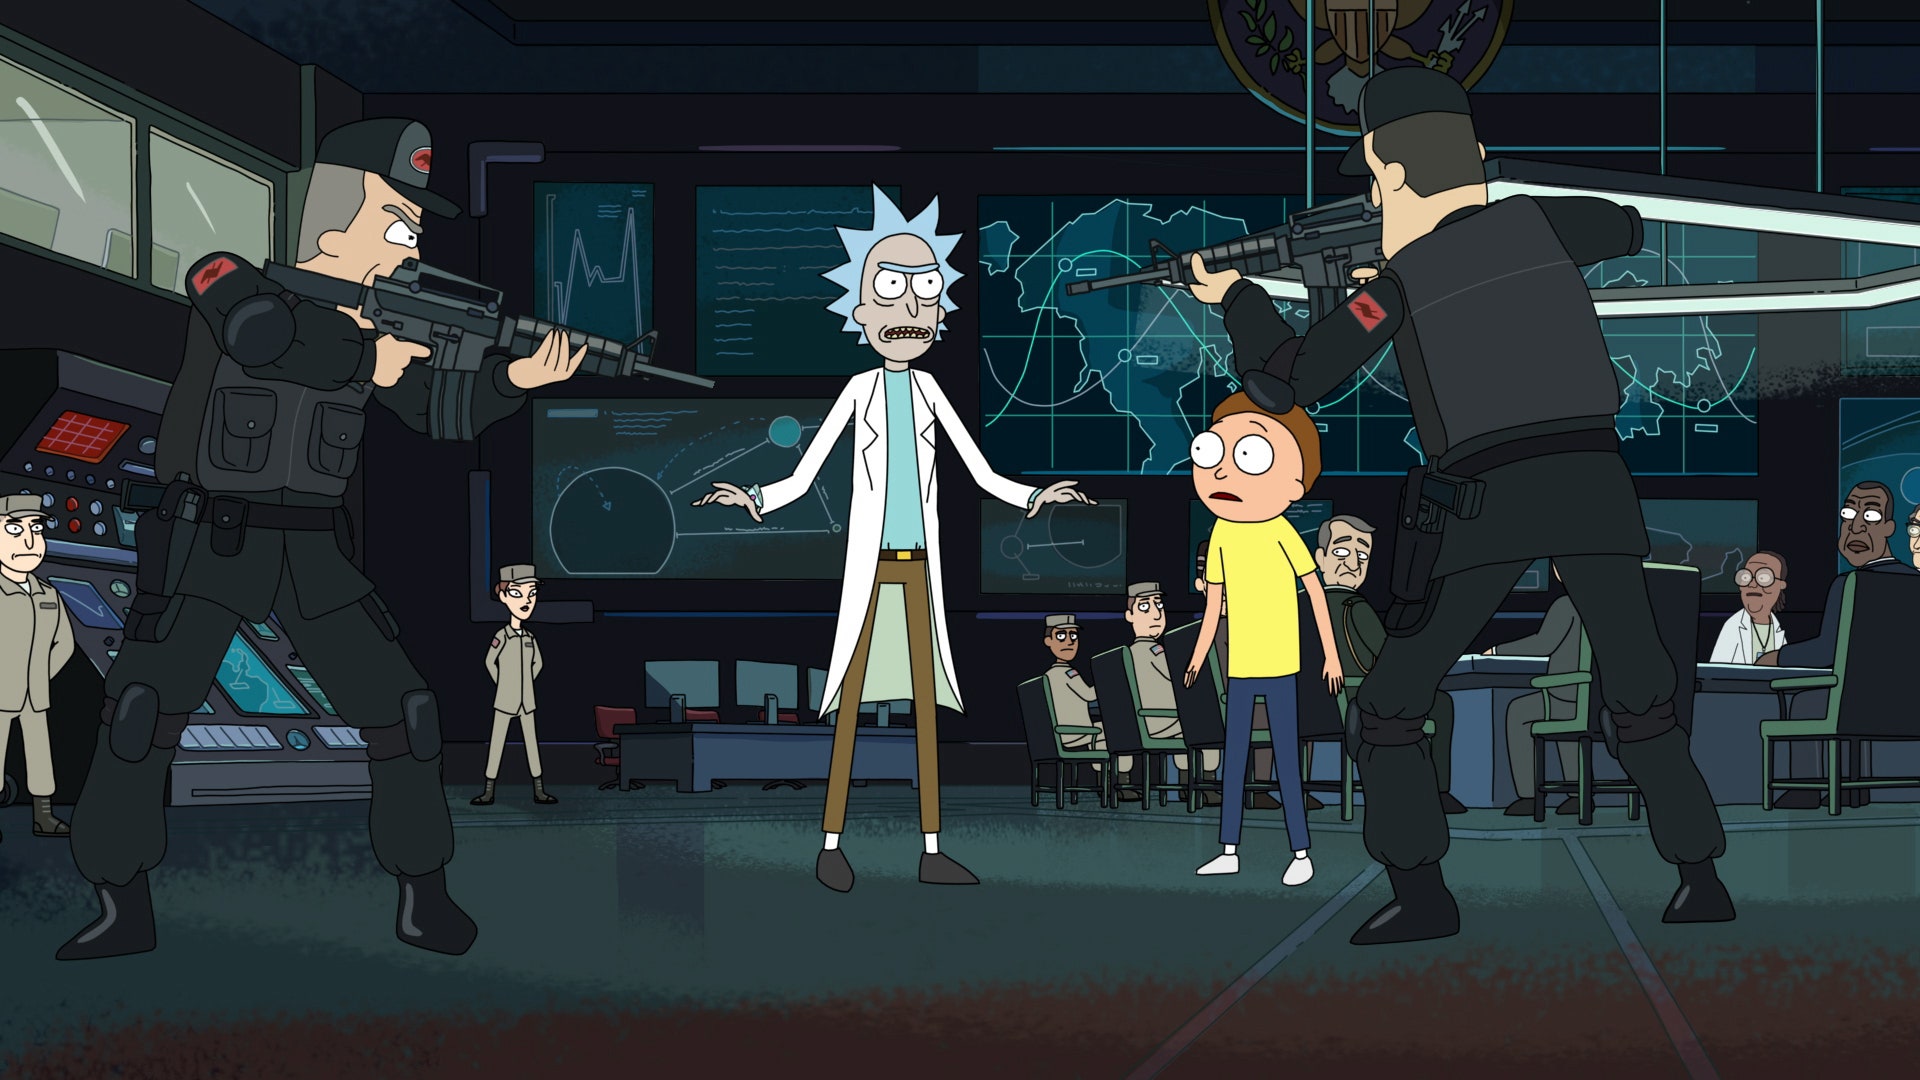 What to Expect from Space Beth in the Upcoming Rick and Morty Season 7